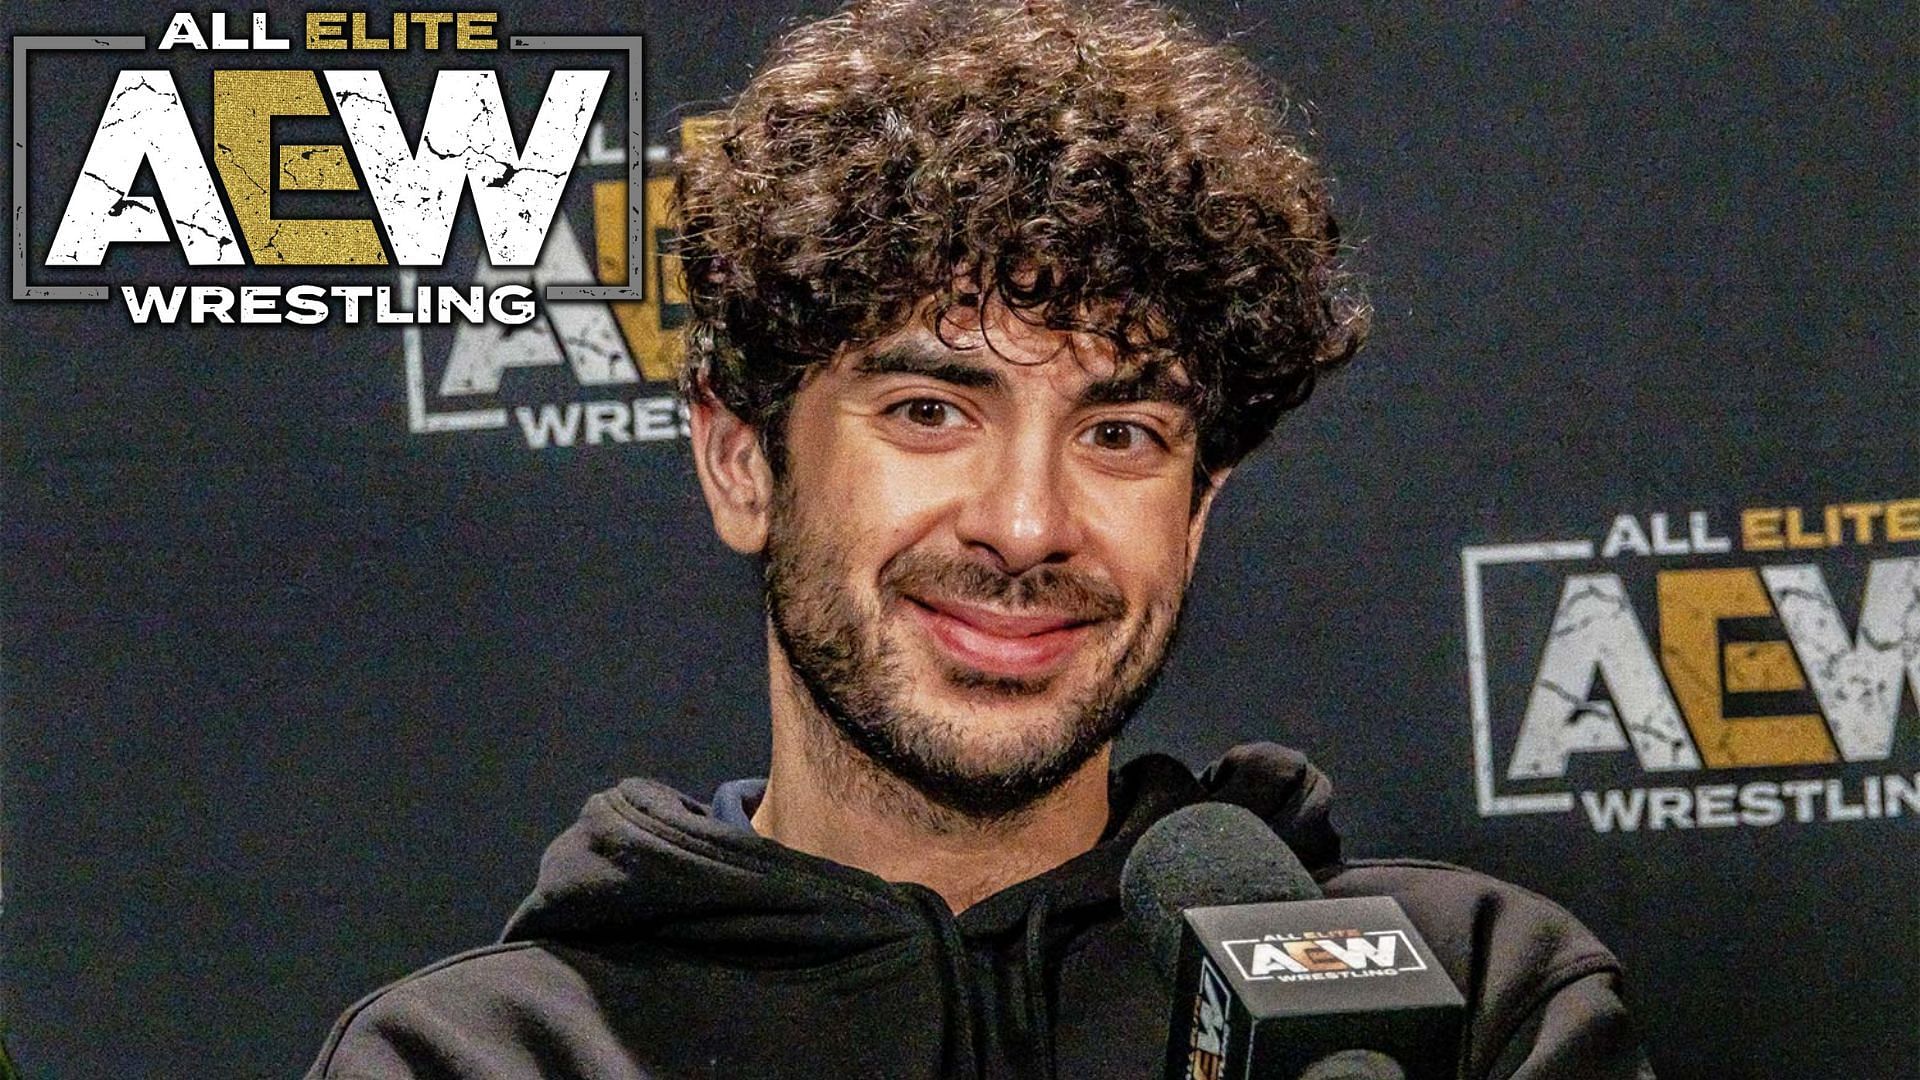 Tony Khan has been making major moves in AEW as of late.